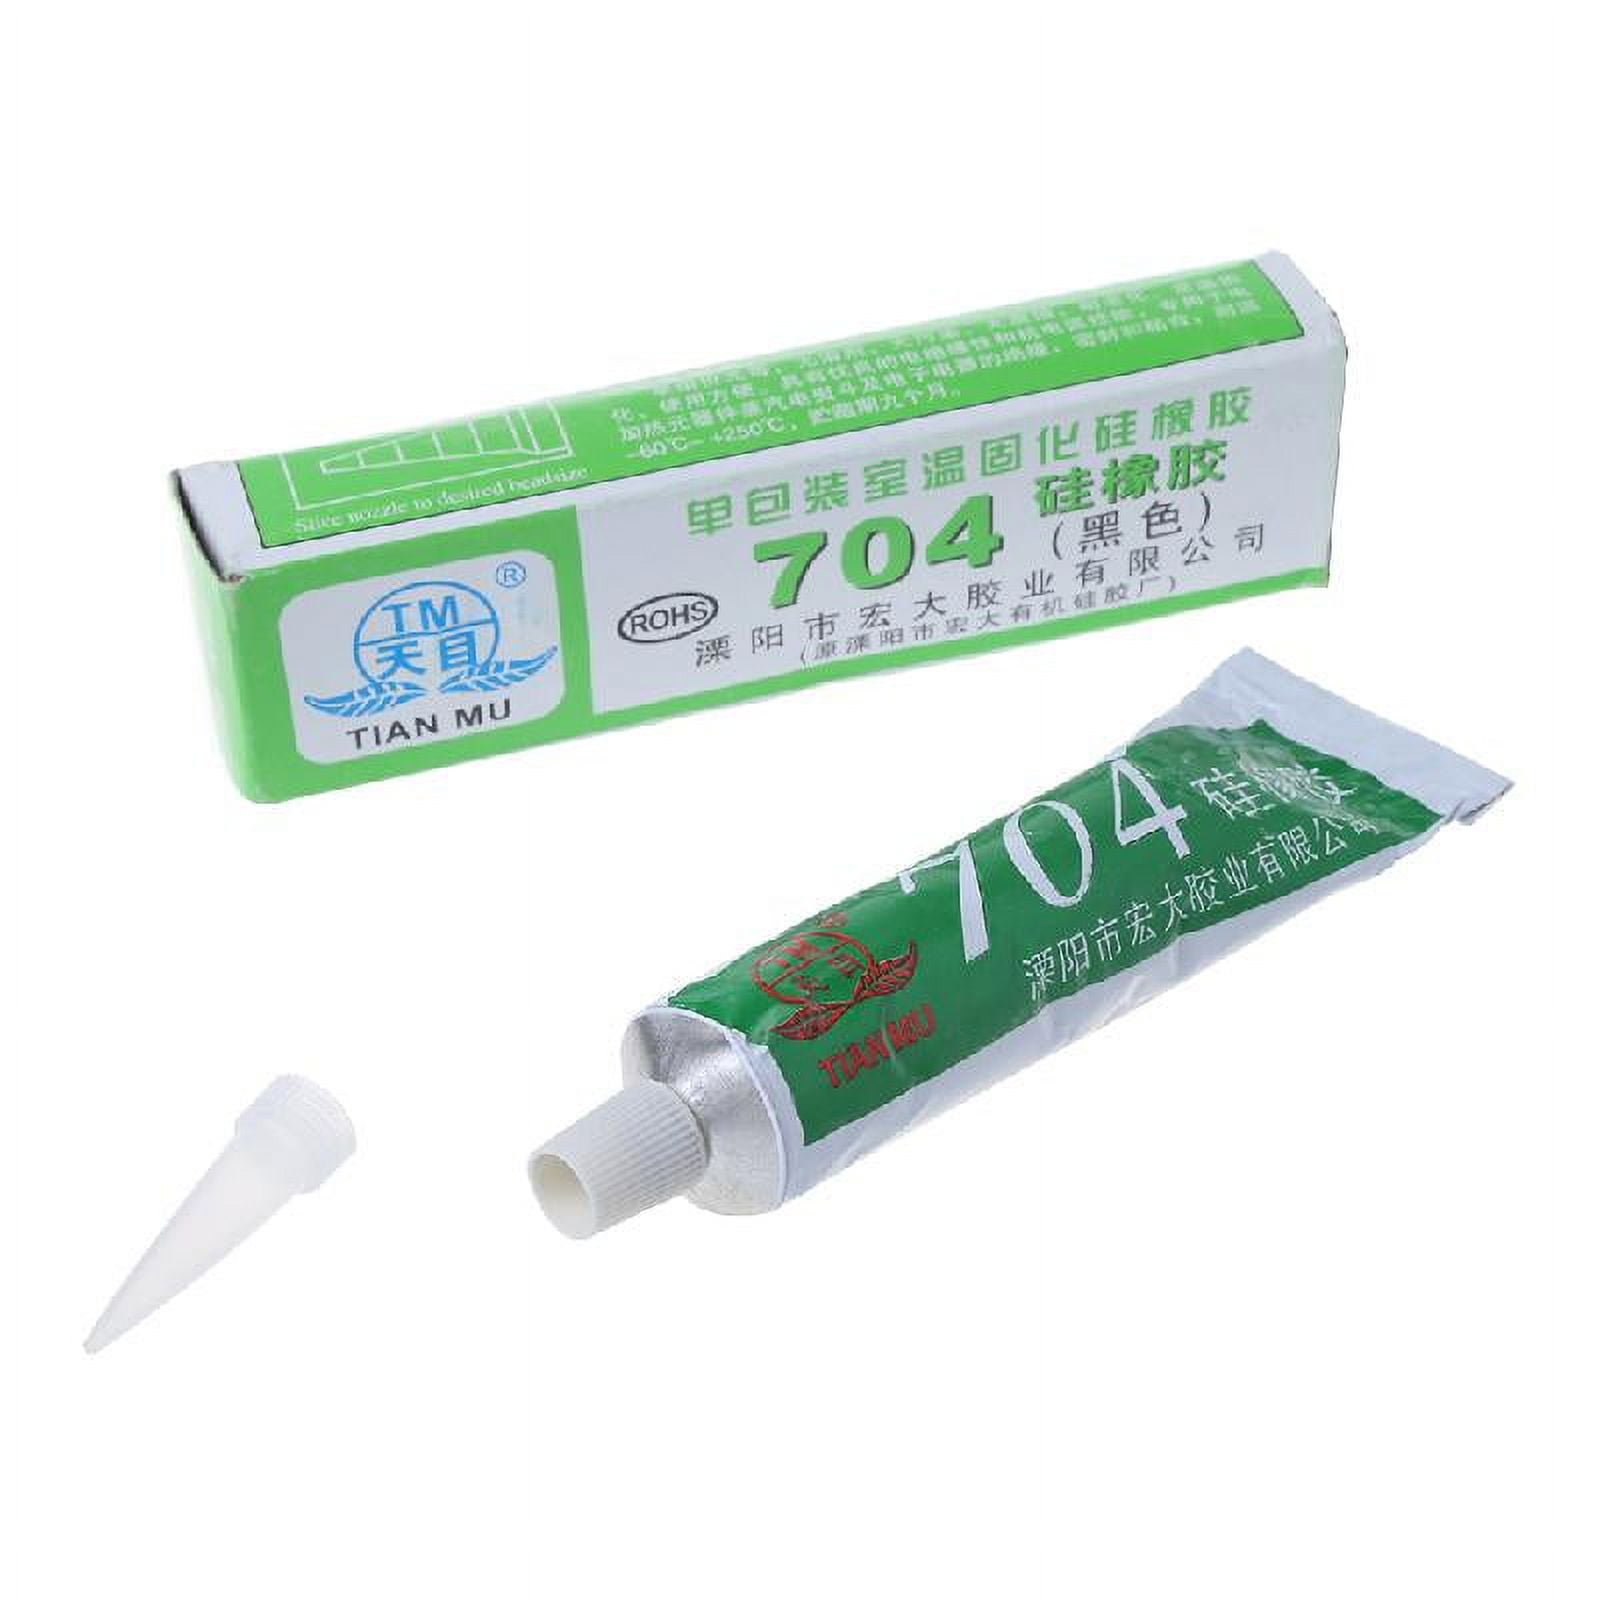 30ml Household Dolls Repair Liquid Solvent Glue Silicone TPE for Doll  Strong Adhesive Transparent TPE for Doll Repair Gl 